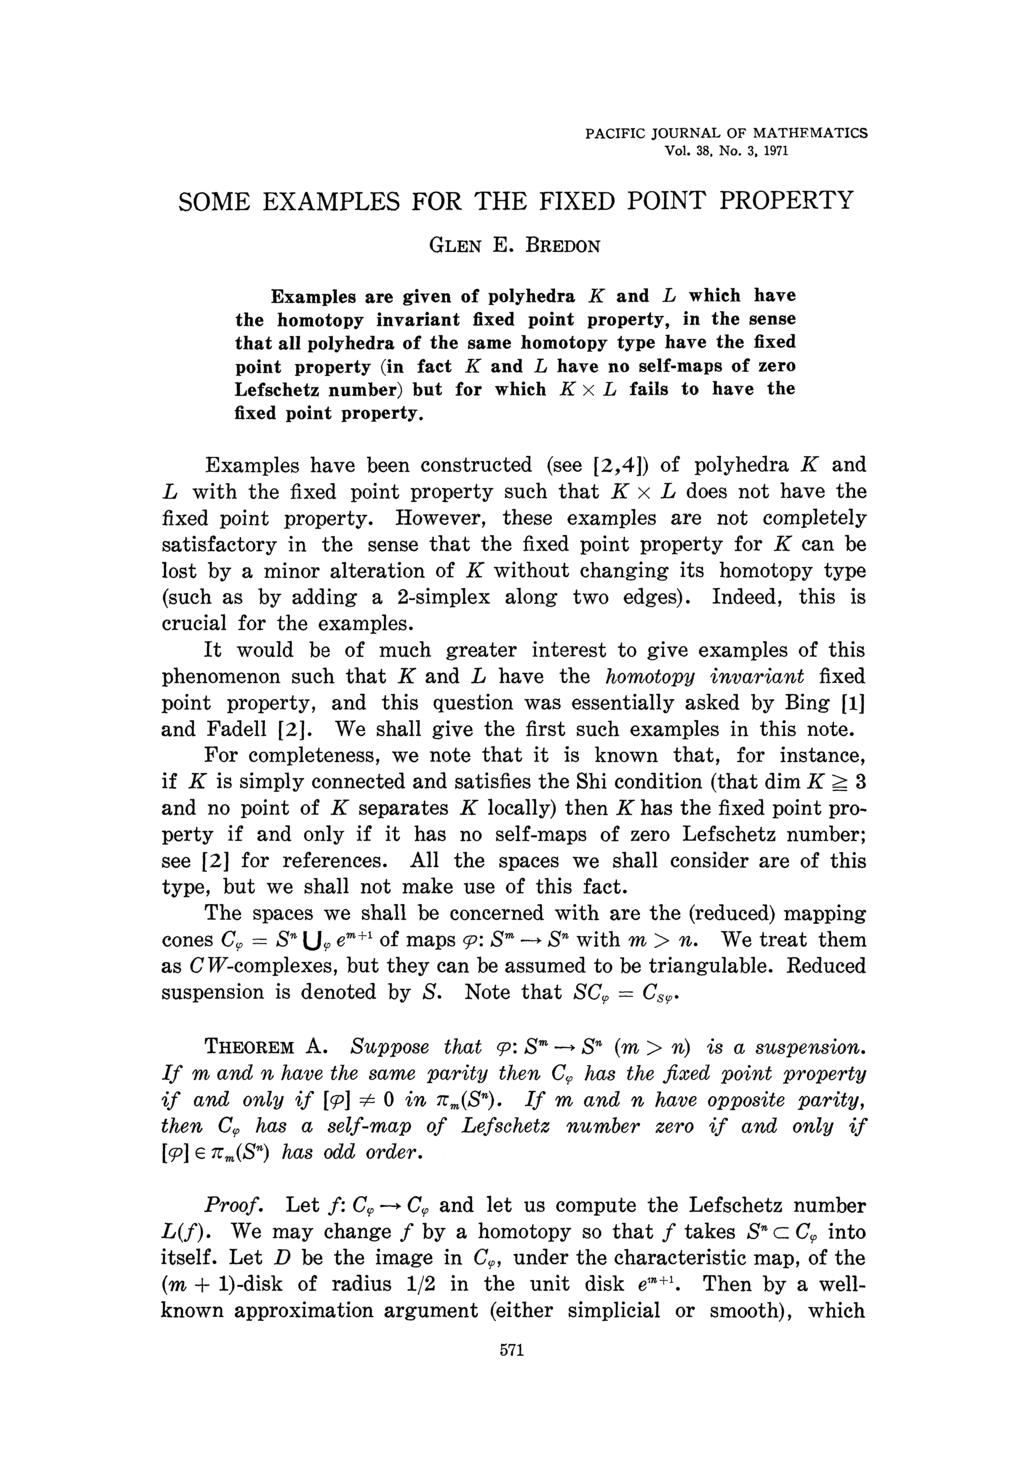 PACIFIC JOURNAL OF MATHEMATICS Vol. 38. No. 3, 1971 SOME EXAMPLES FOR THE FIXED POINT PROPERTY GLEN E.